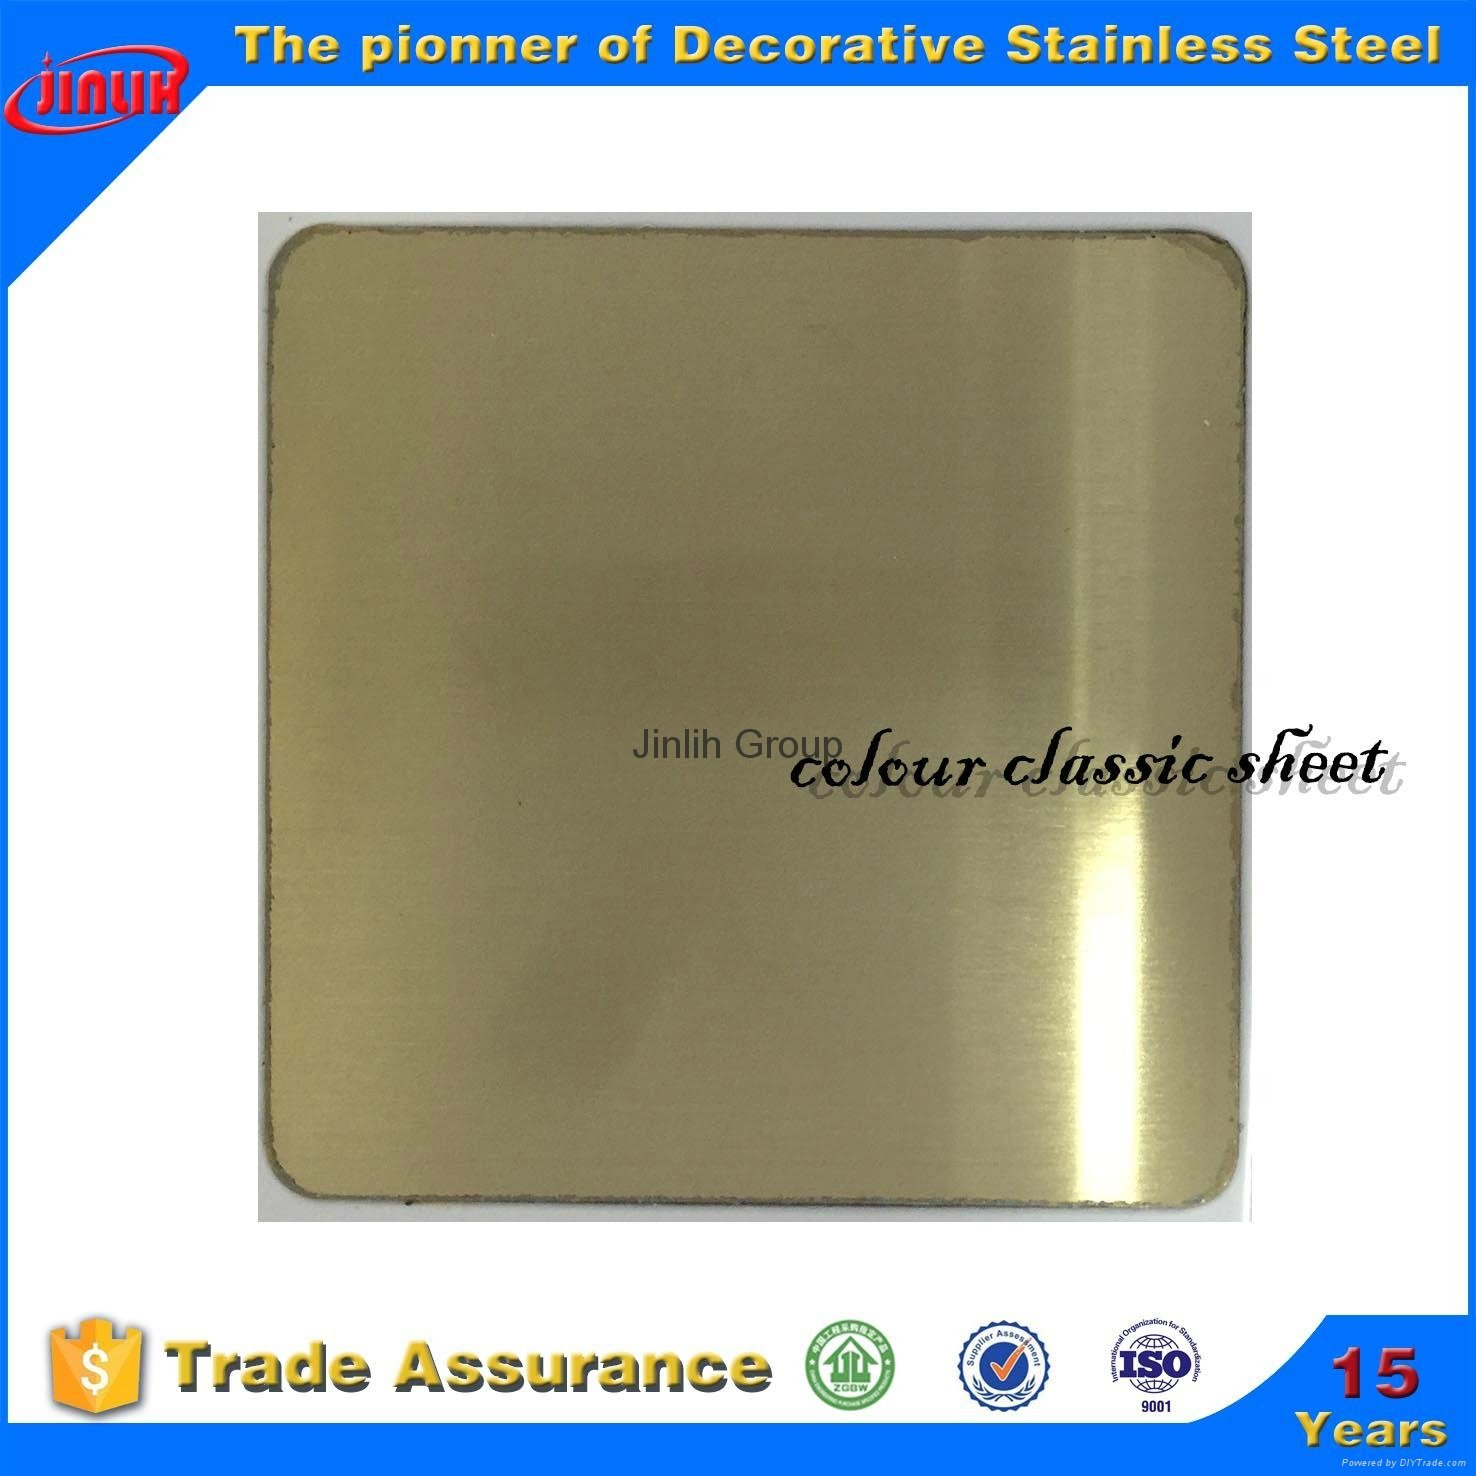 ss304 decorative stainless steel sheet 5